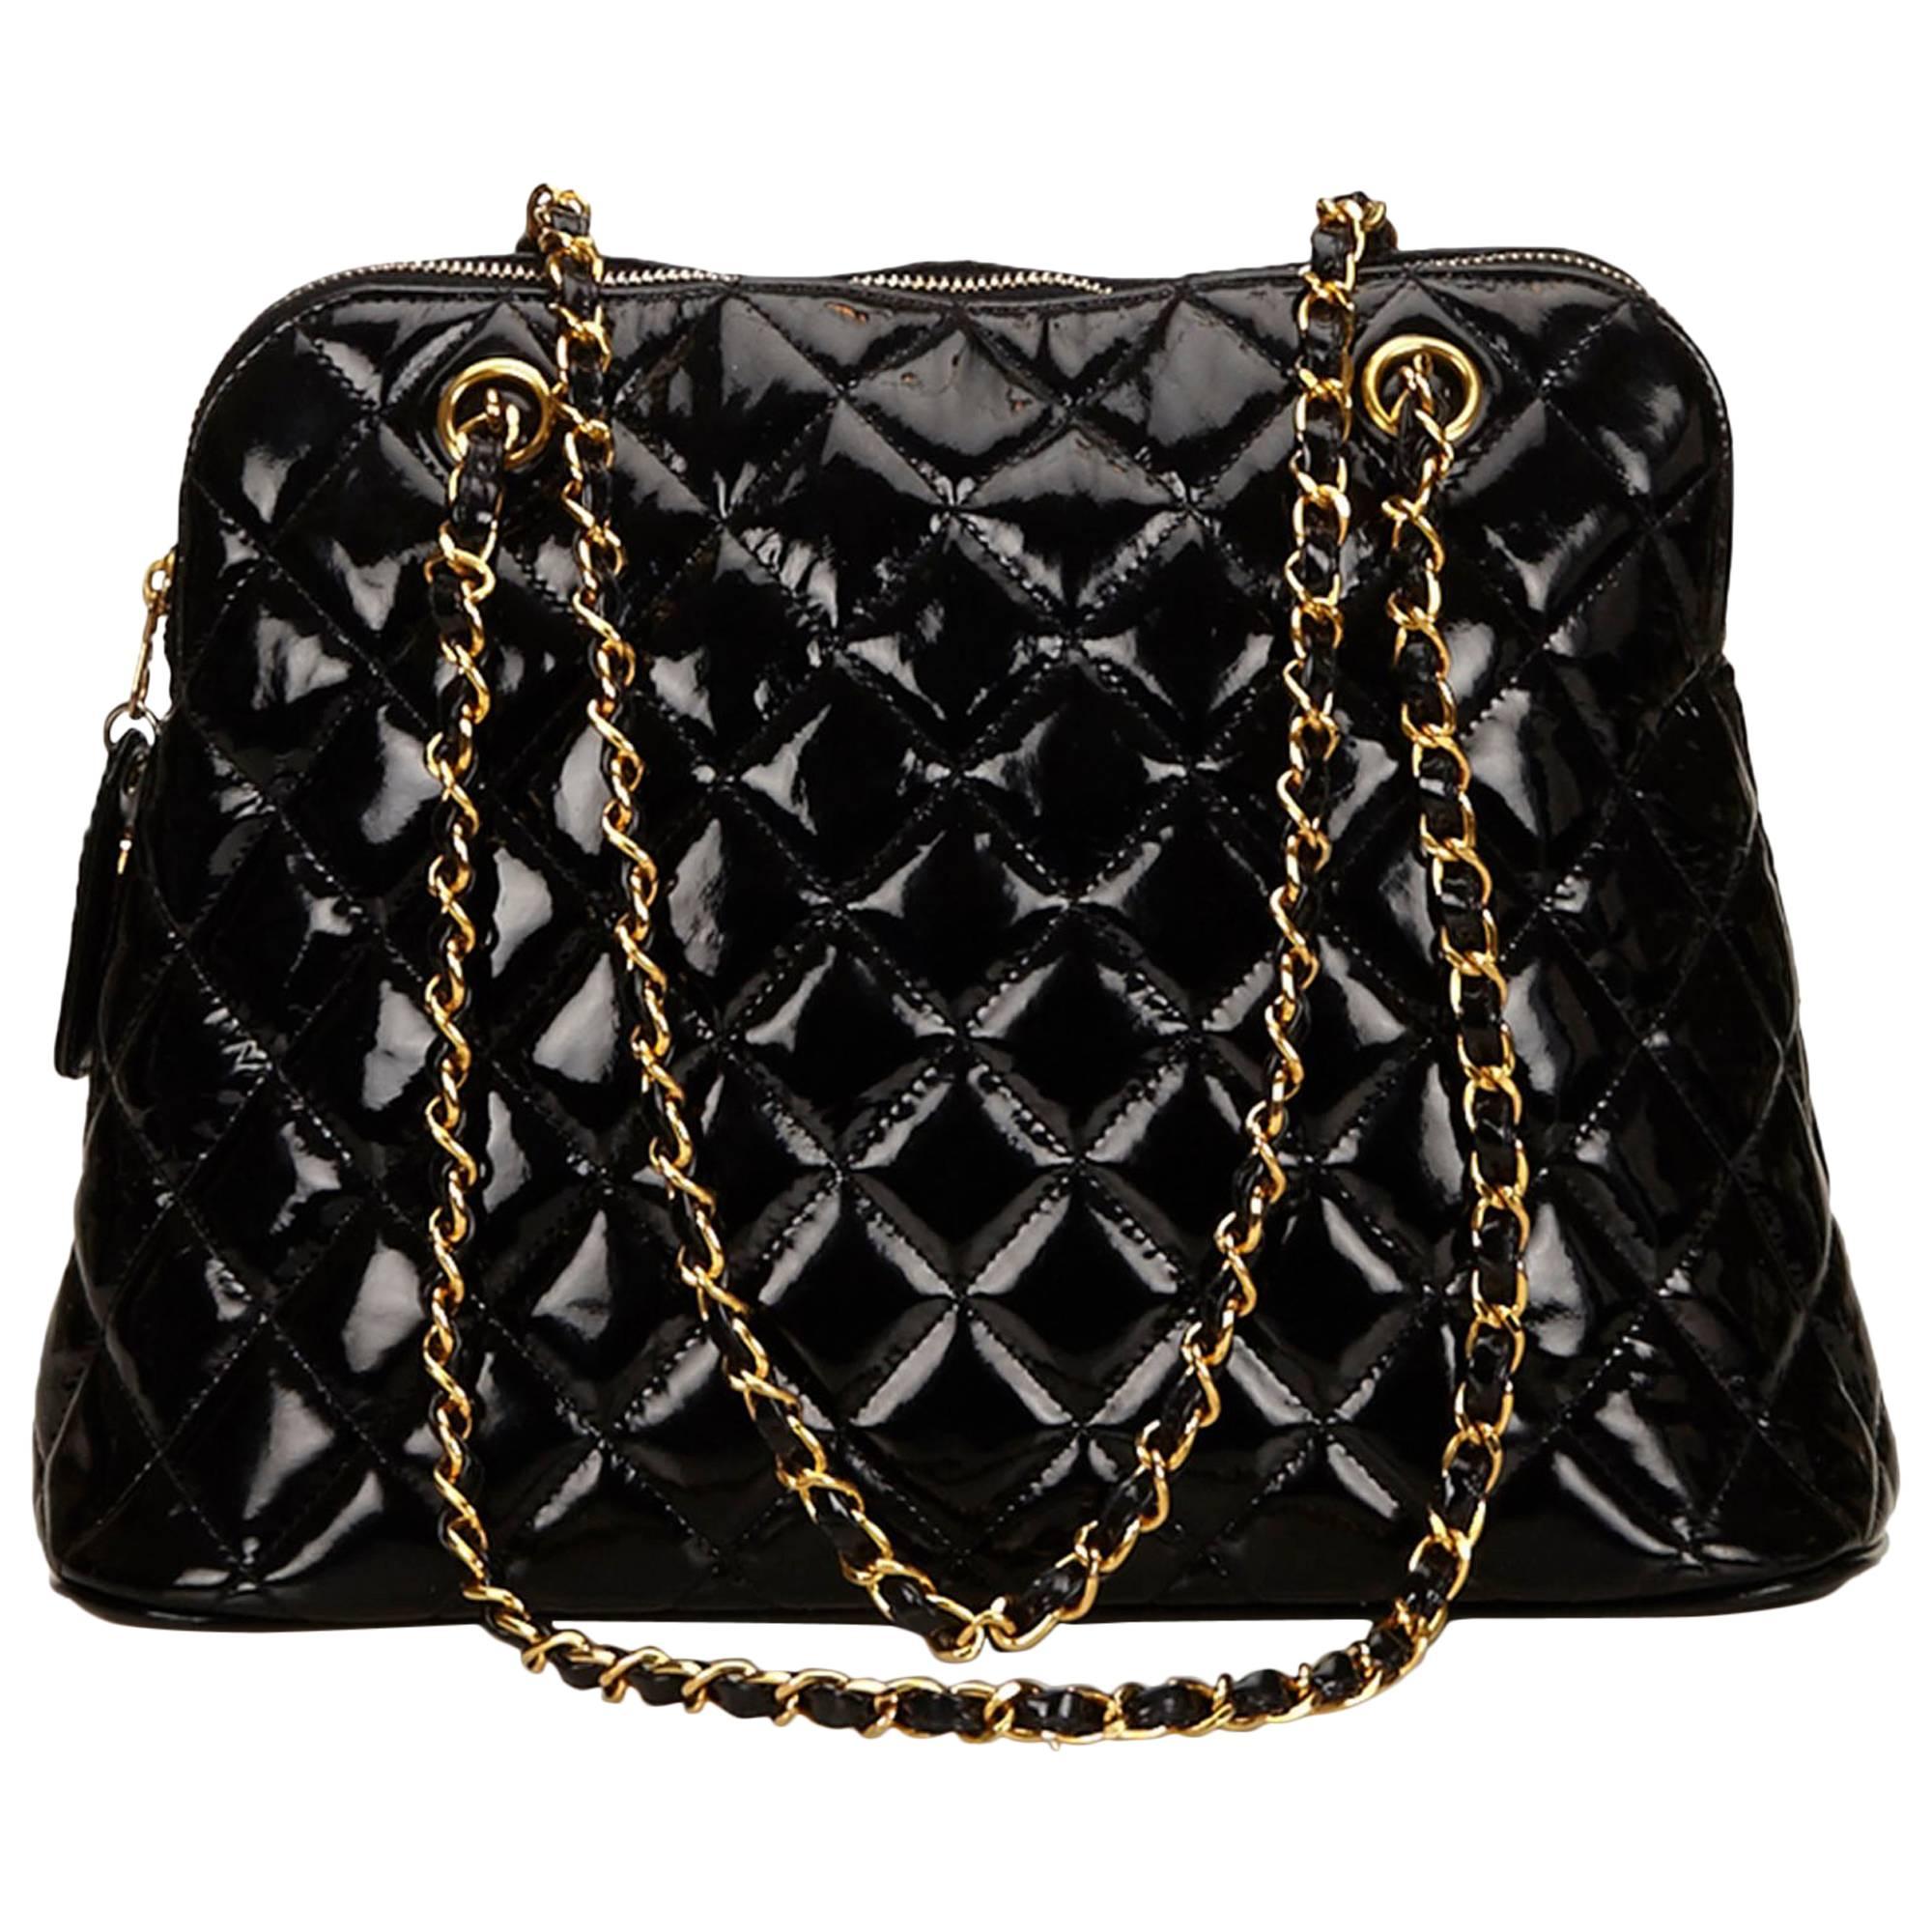 Black Chanel Quilted Patent Leather Bag